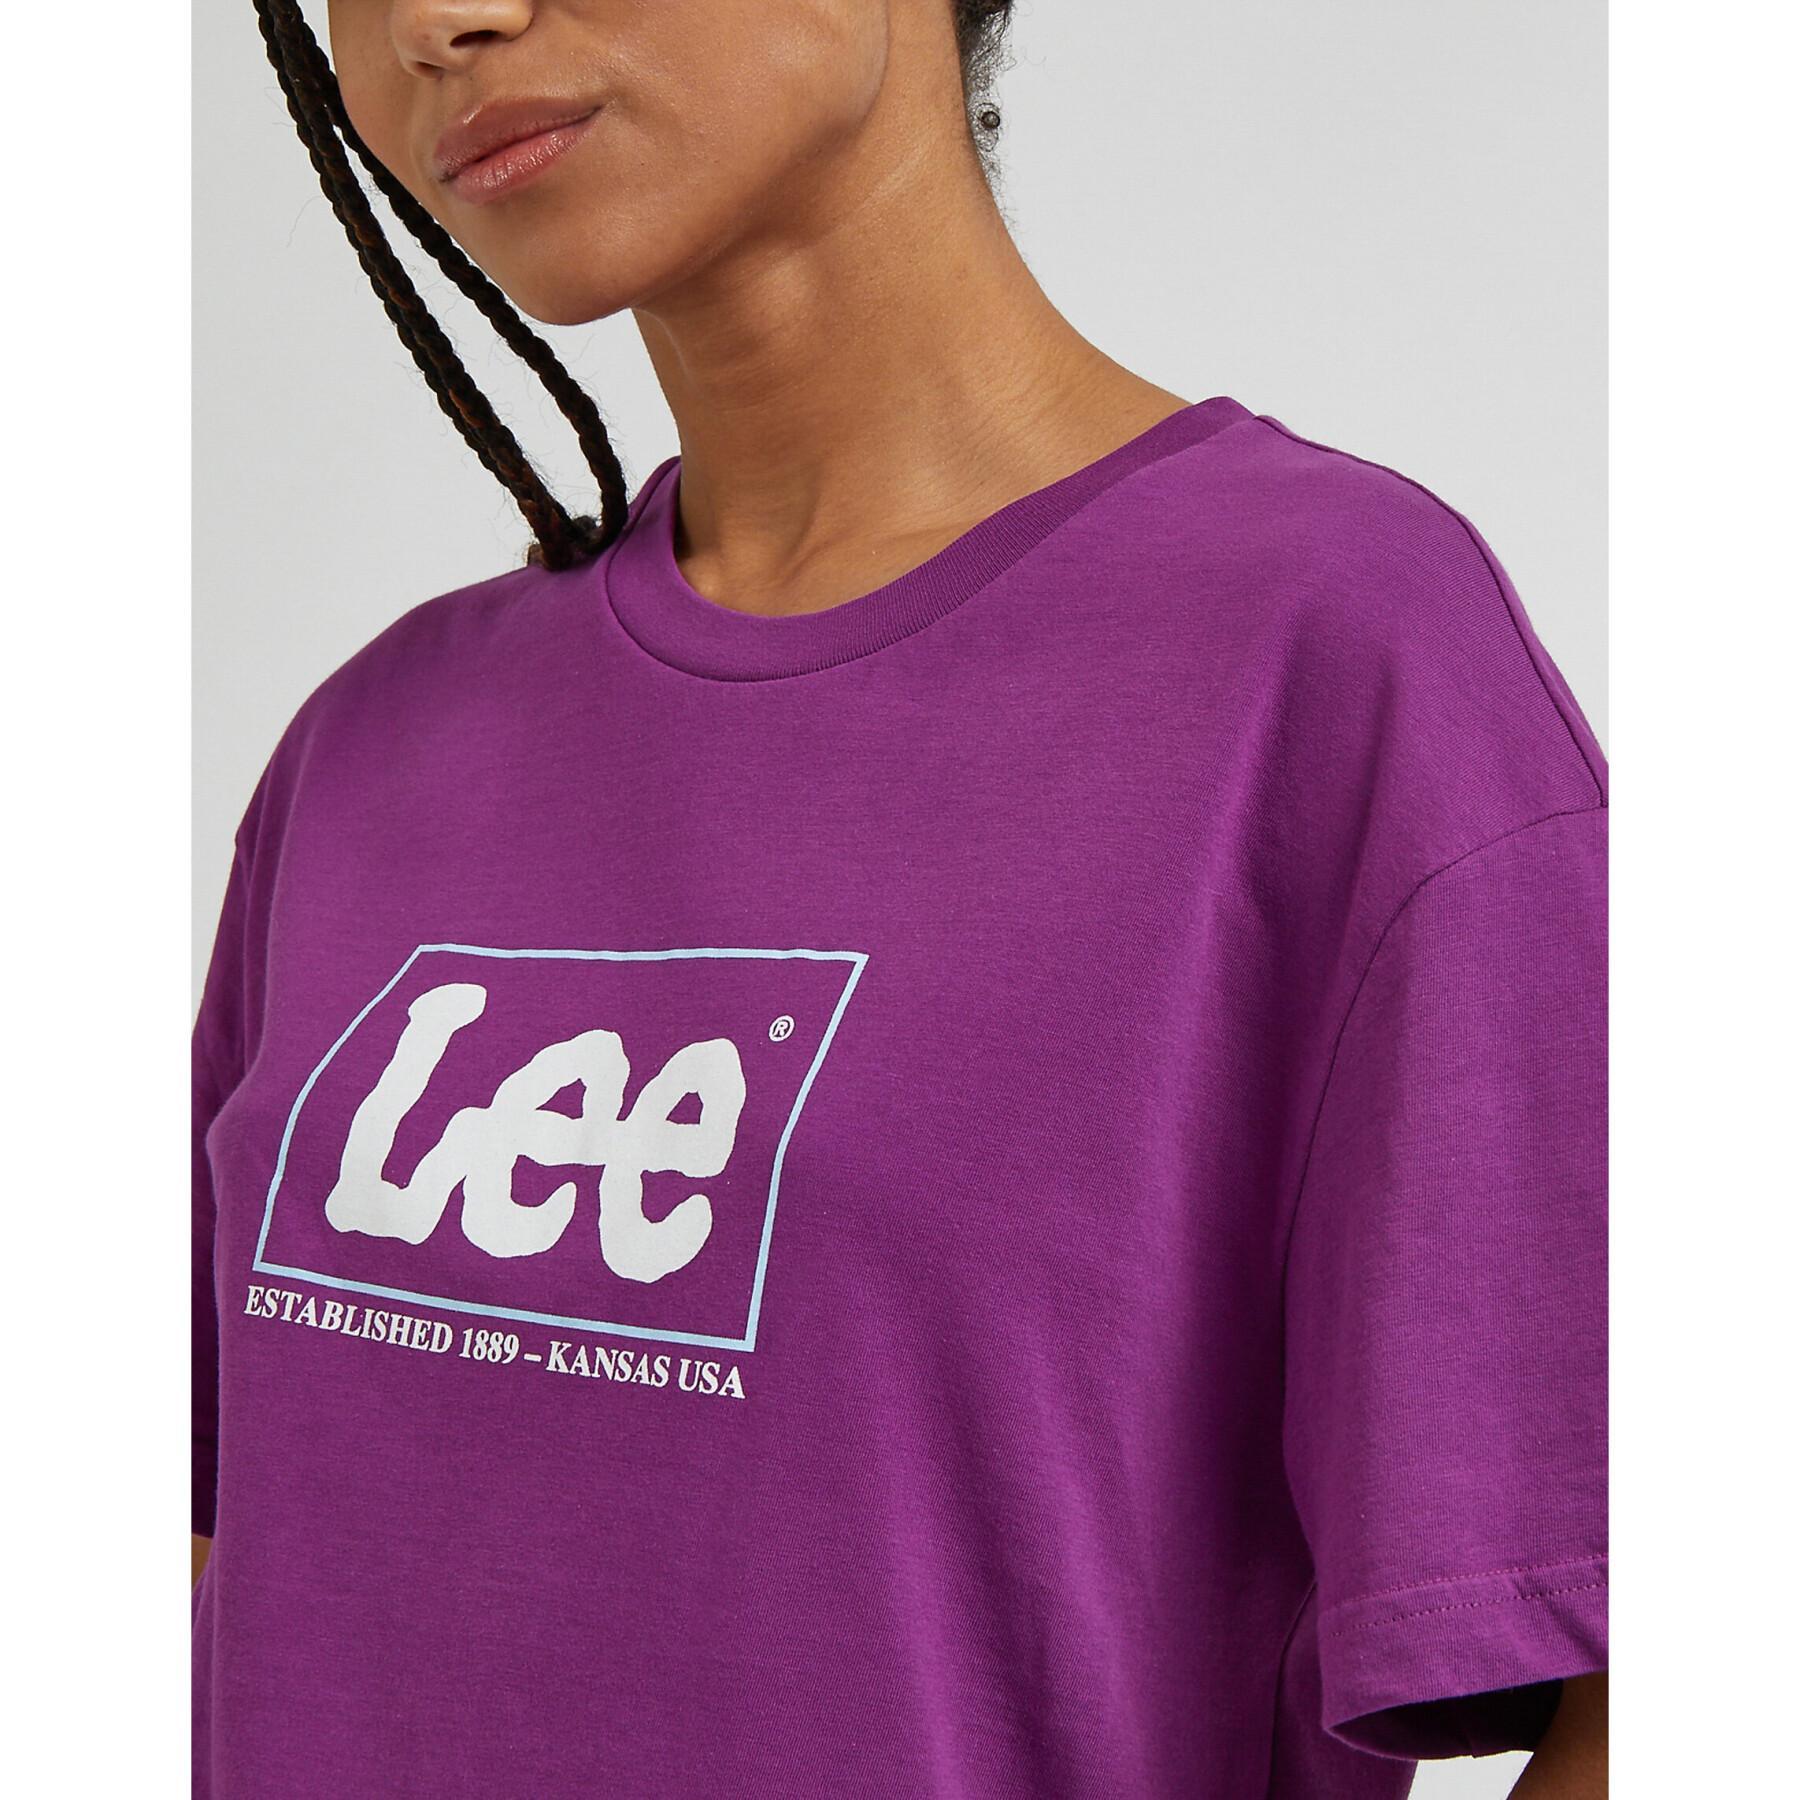 Camiseta de mujer Lee Relaxed